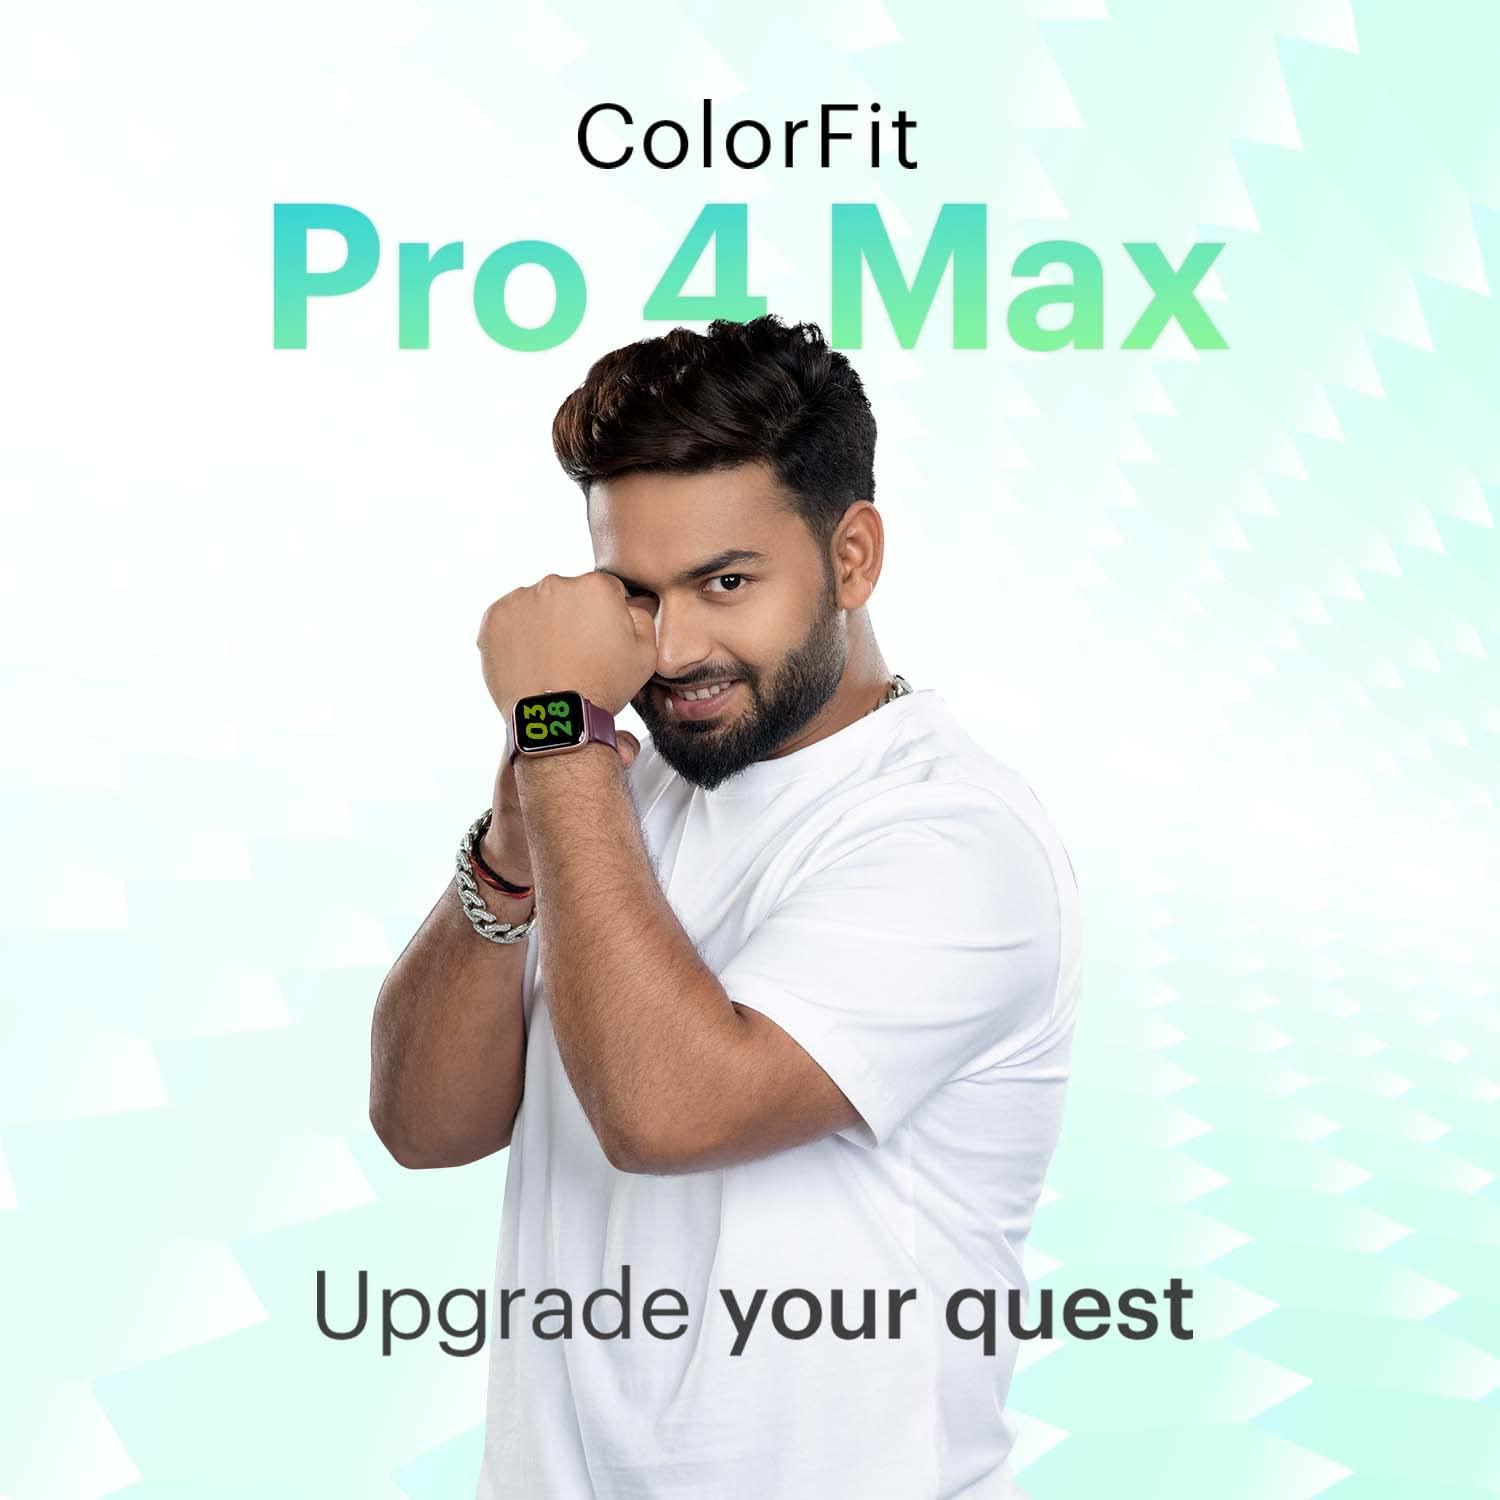 Newly Launched Noise ColorFit Pro 4 Max 1.8" Biggest Display, Bluetooth Calling Smart Watch, Built.in Alexa, 100 Sports Modes, Noise Detection, Noise Health & Productivity Suite (Rose Gold)